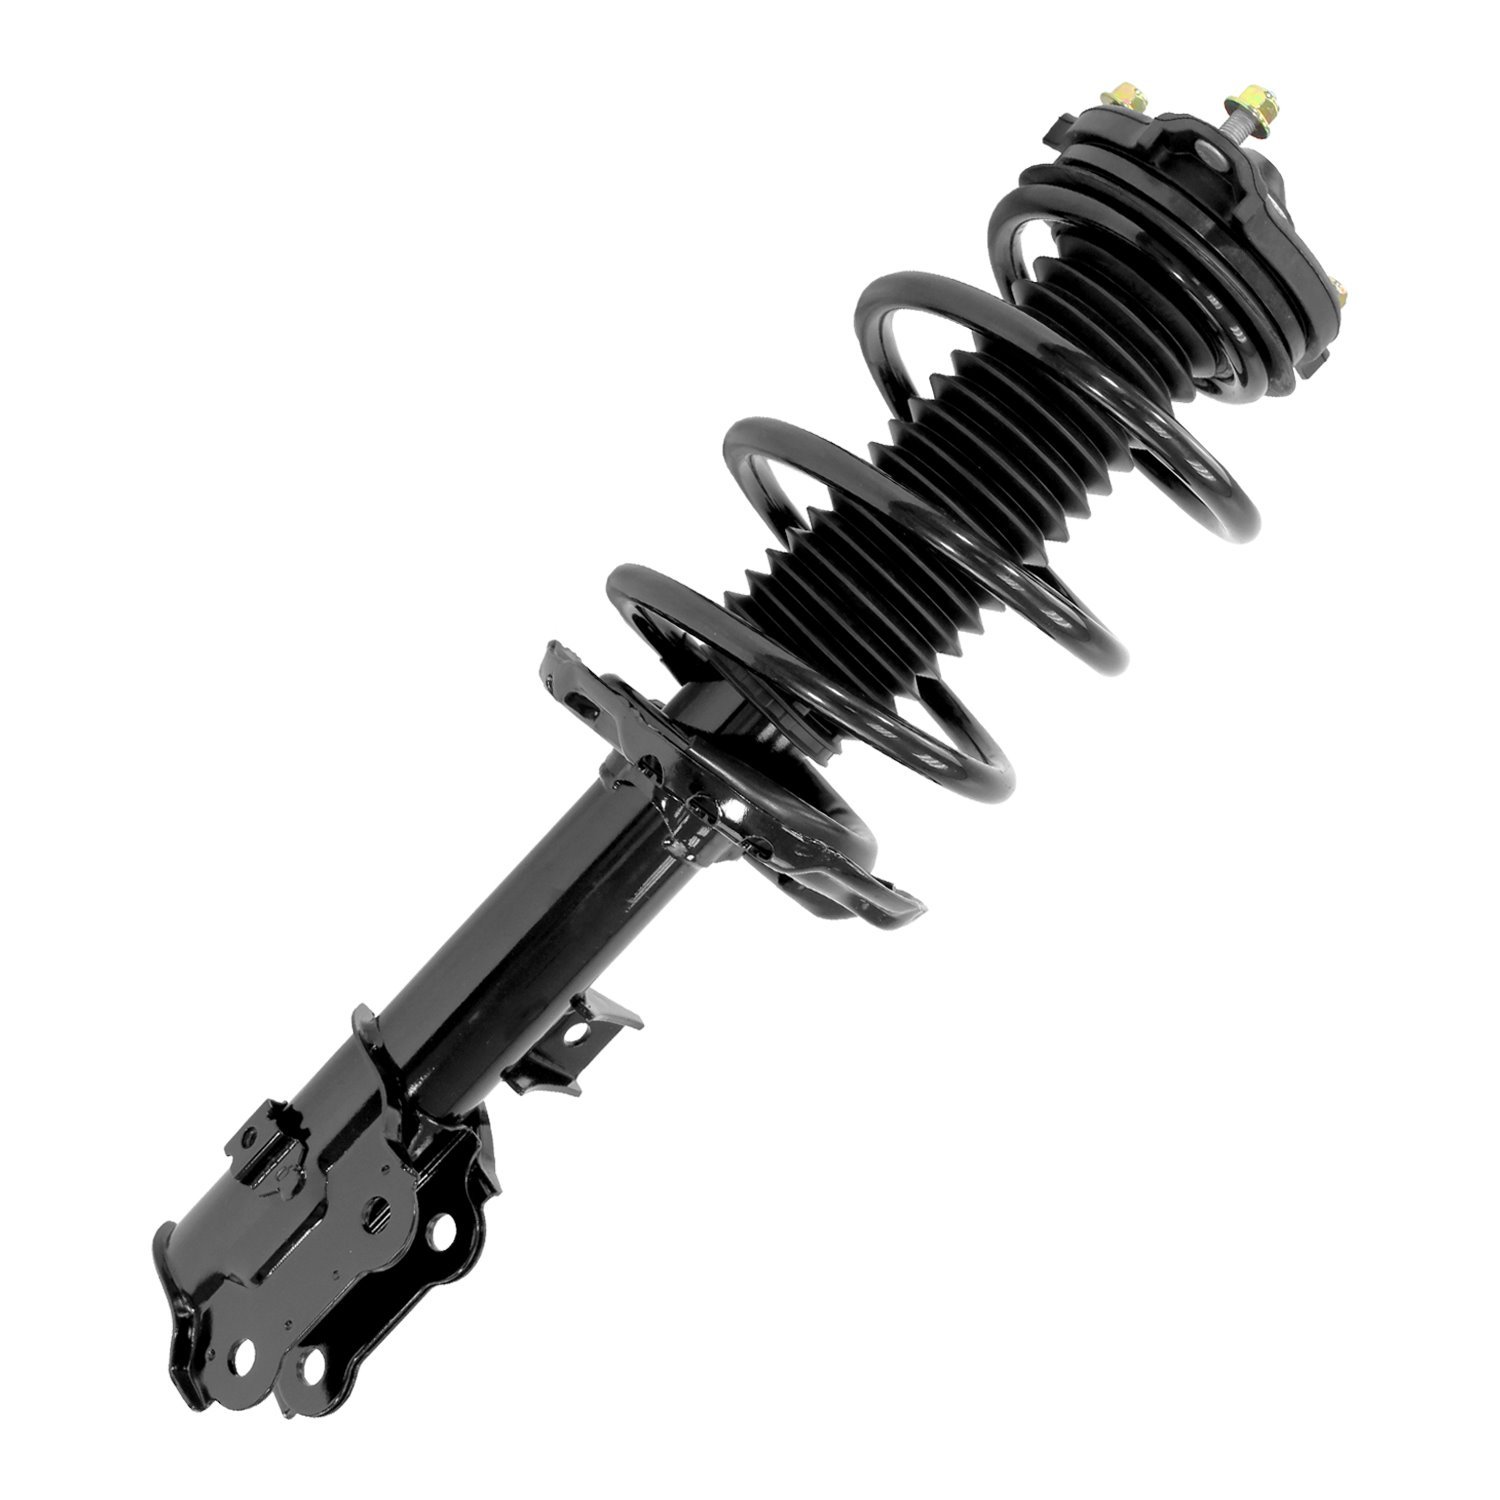 13012 Front Suspension Strut & Coil Spring Assemby Fits Select Kia Sportage, Hyundai Tucson